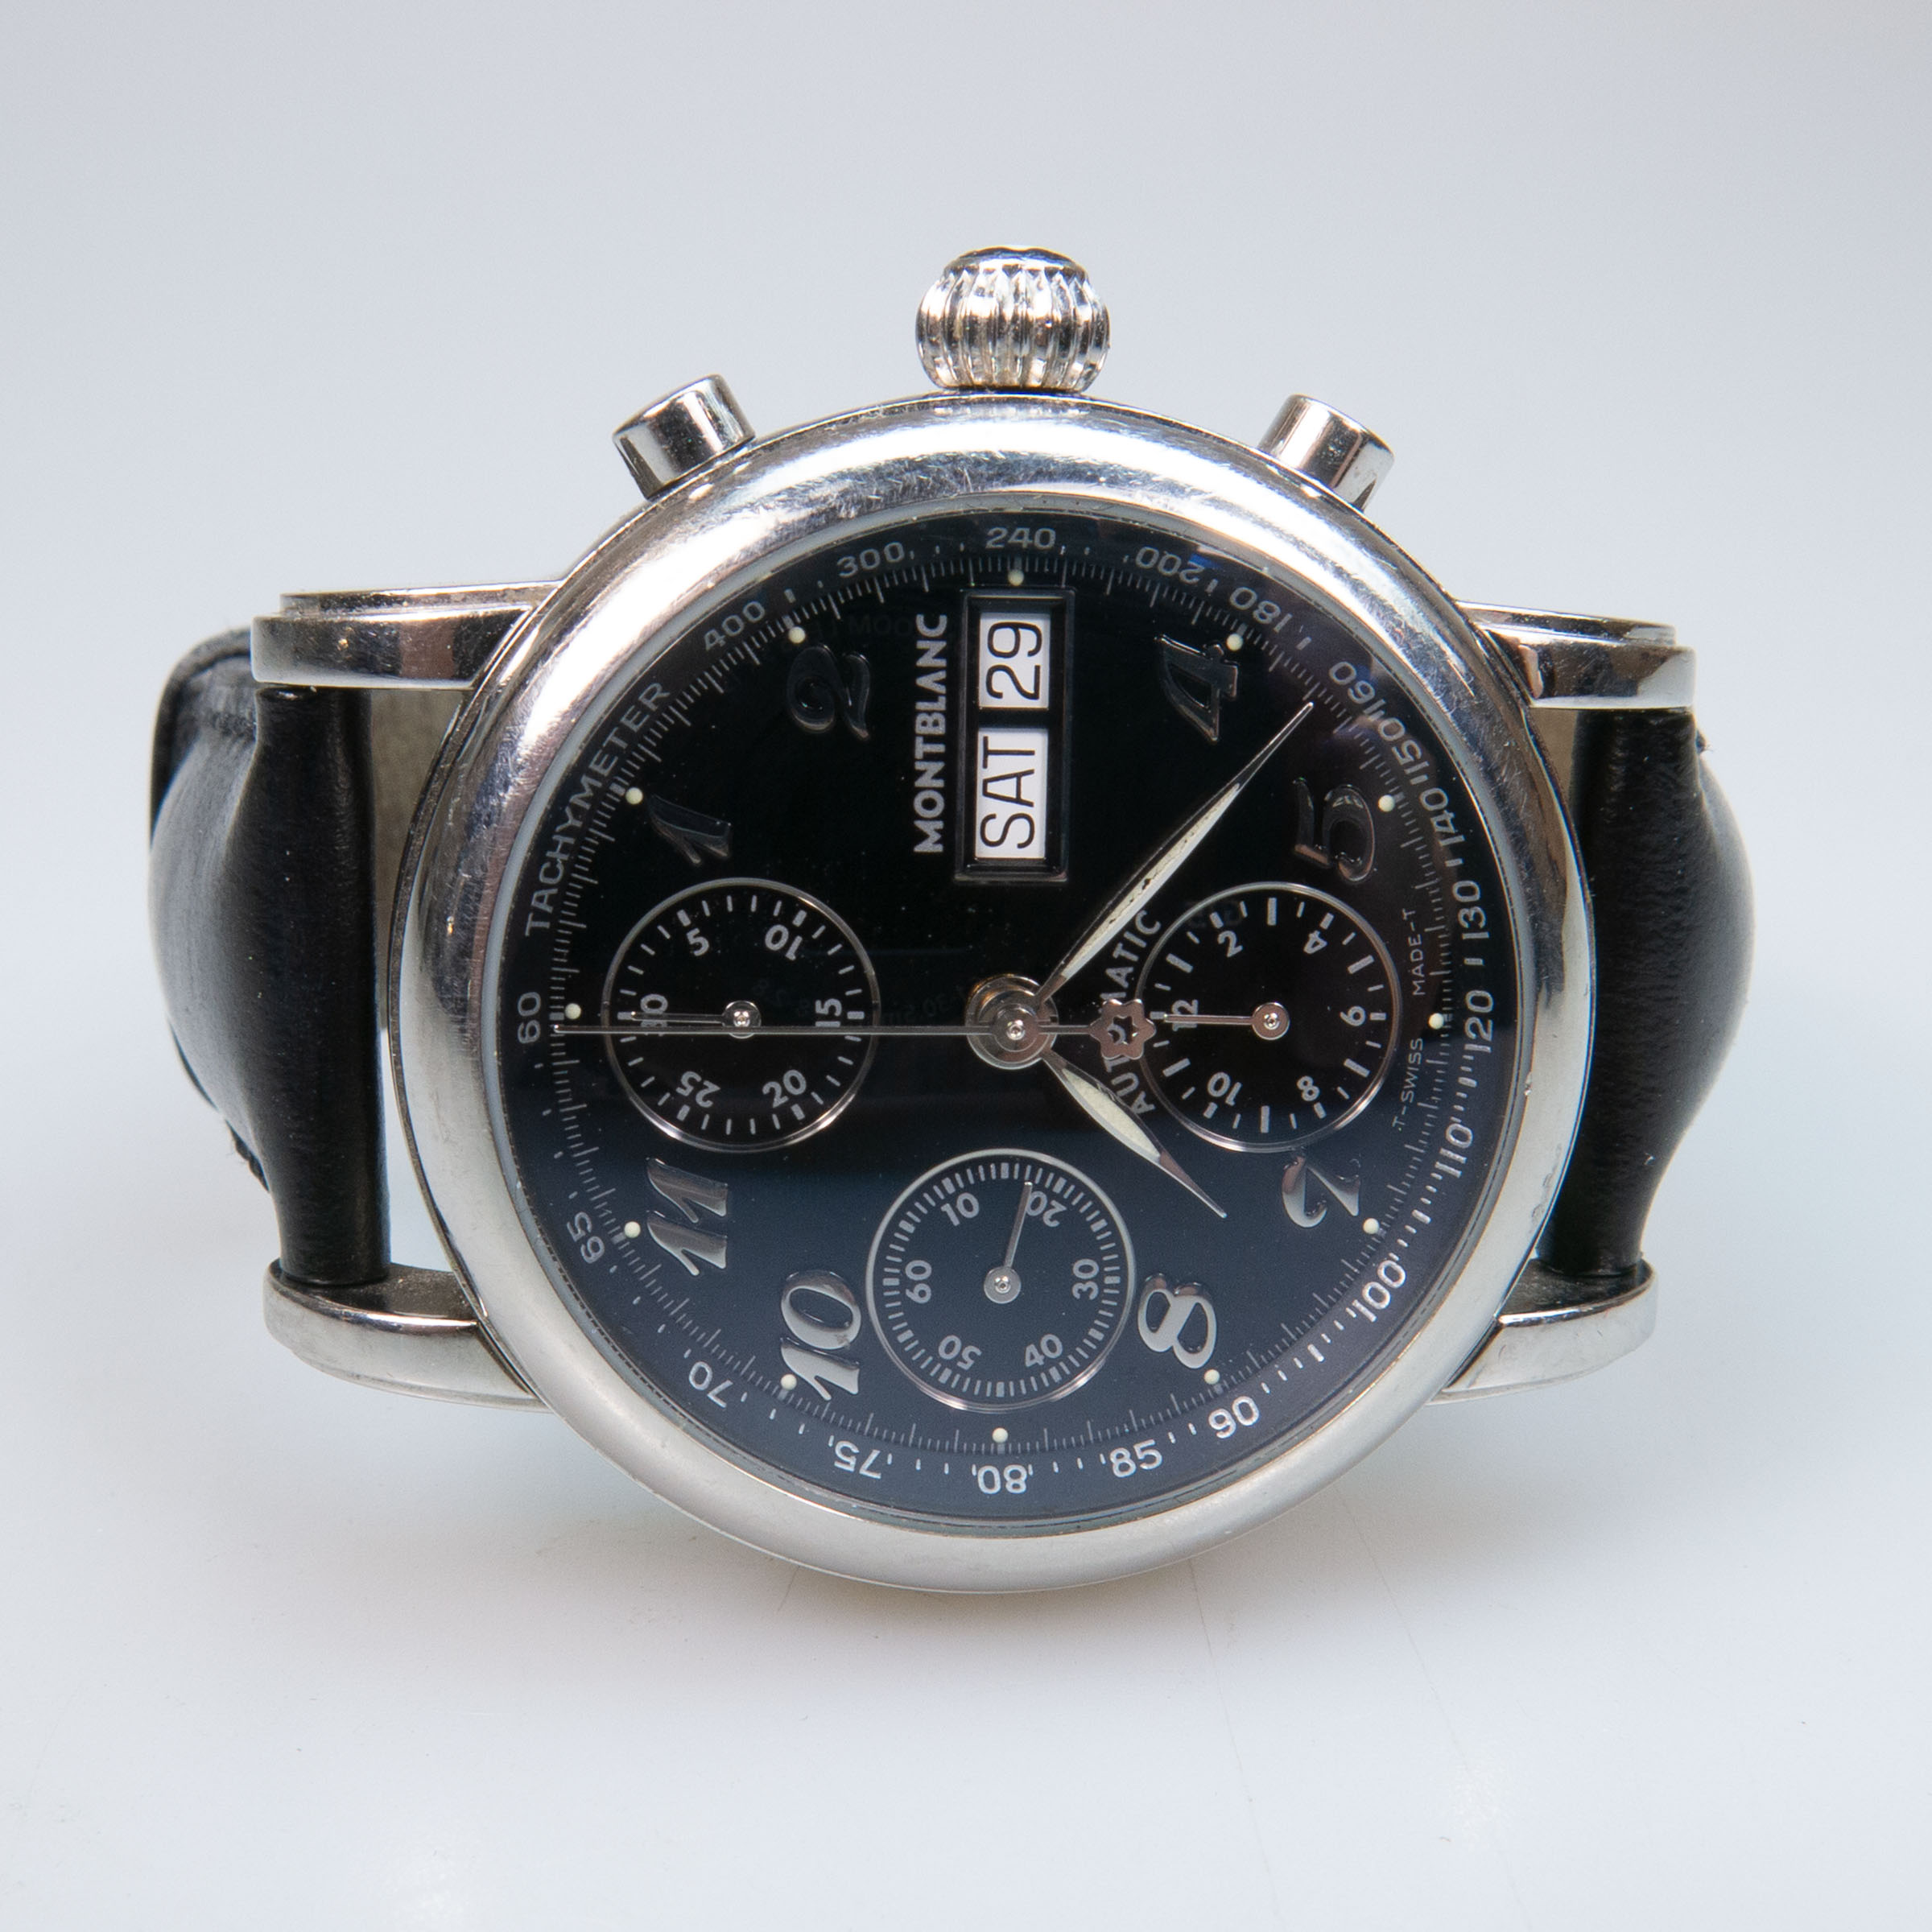 Montblanc Meisterstück Wristwatch With Day, Date And Chronograph